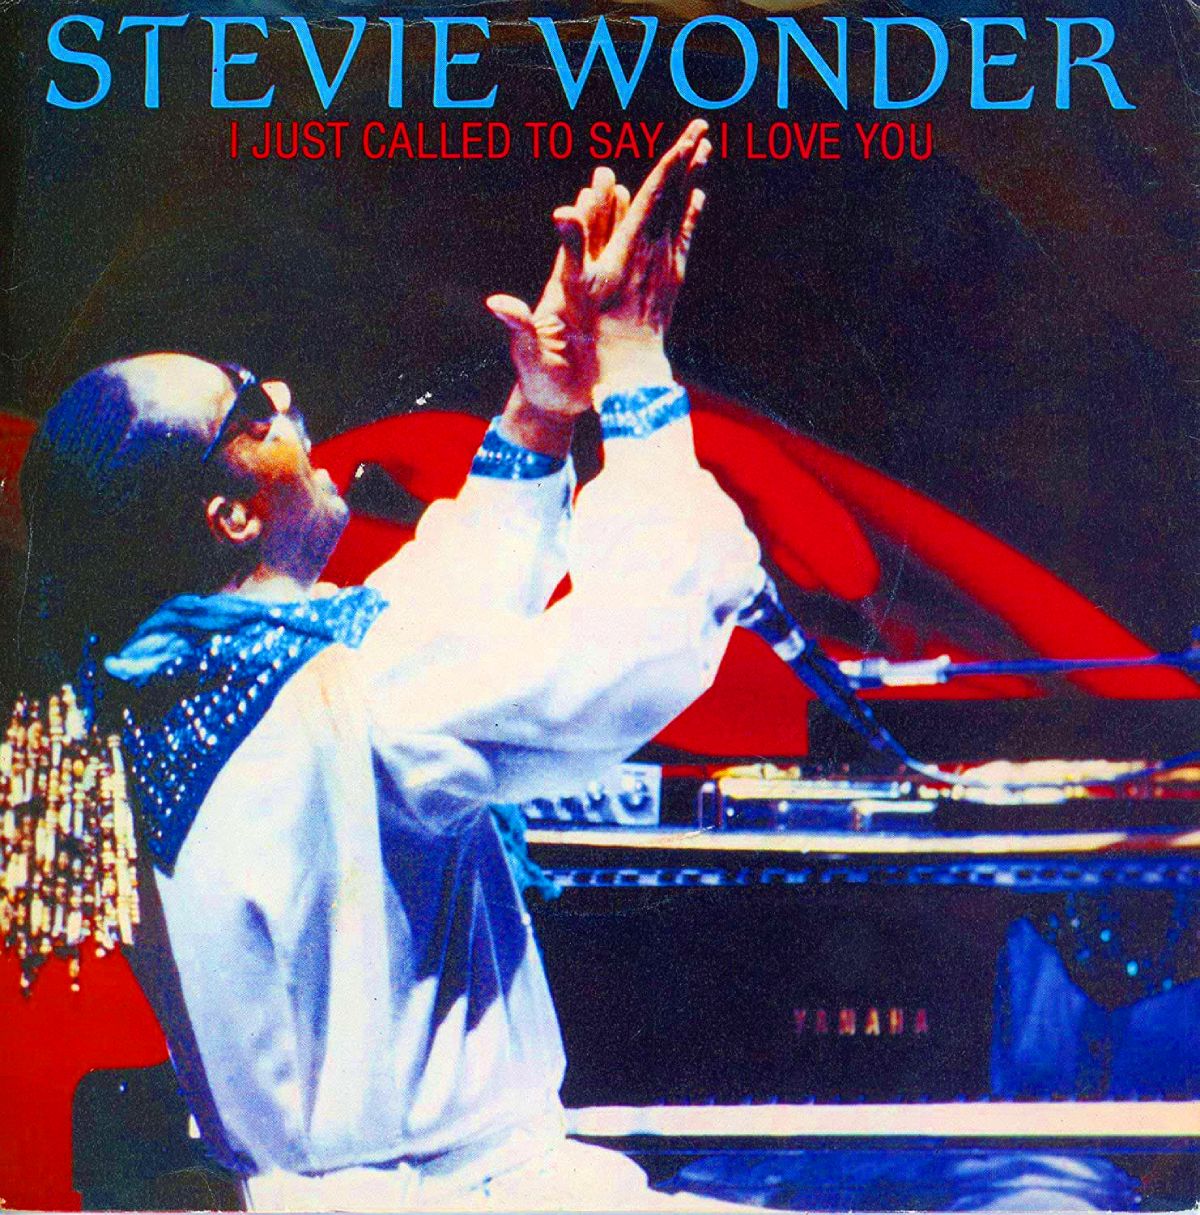 I Just Called to Say I Love You (1984) - Stevie Wonder - single cover